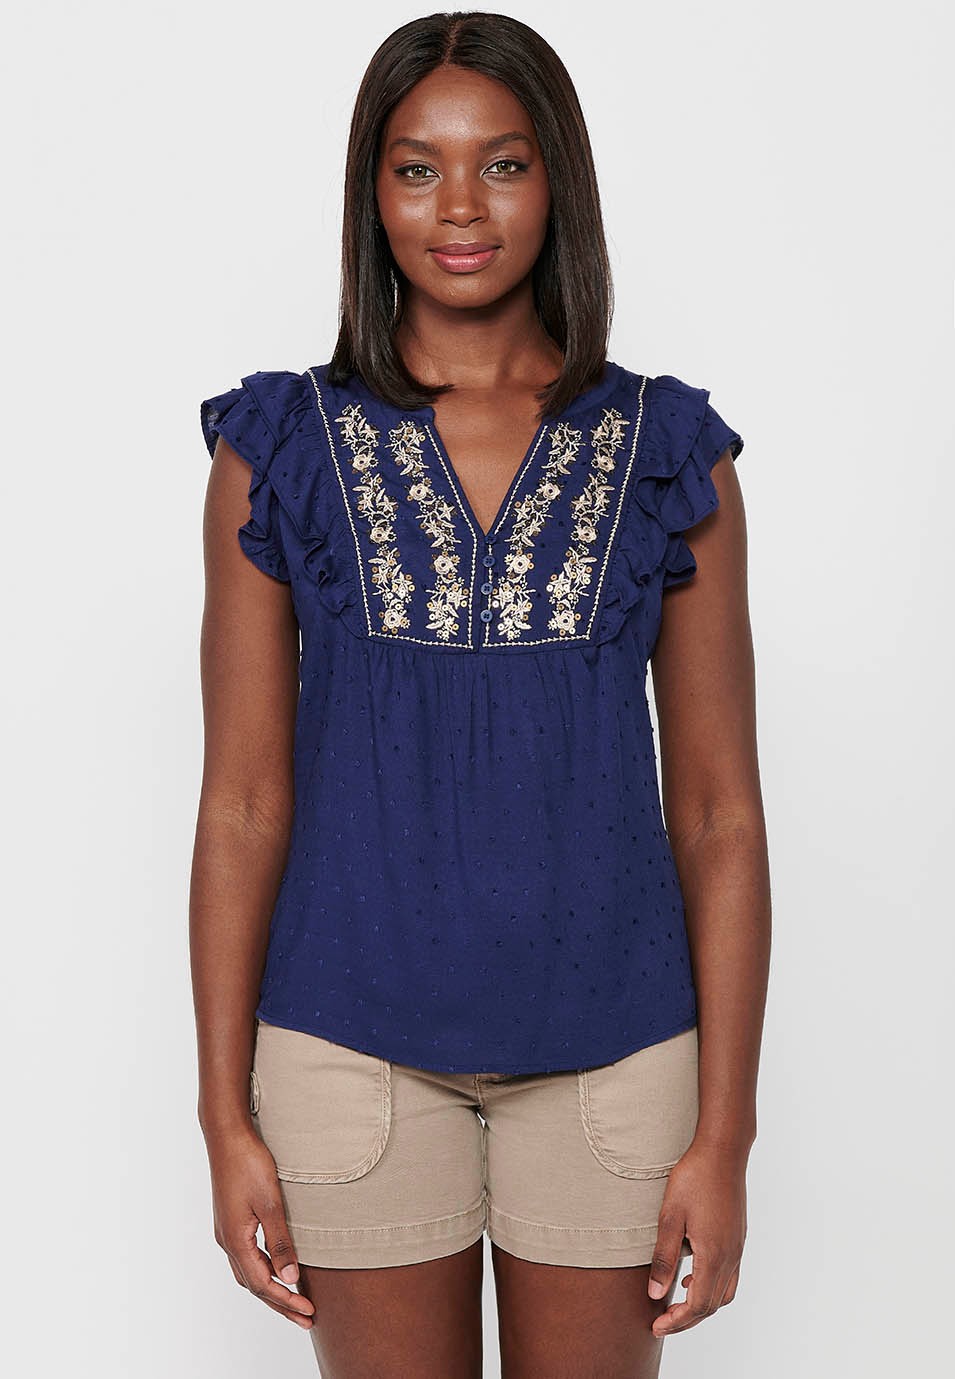 Navy Color Blouse with short ruffle sleeves and front embroidery detail for Women